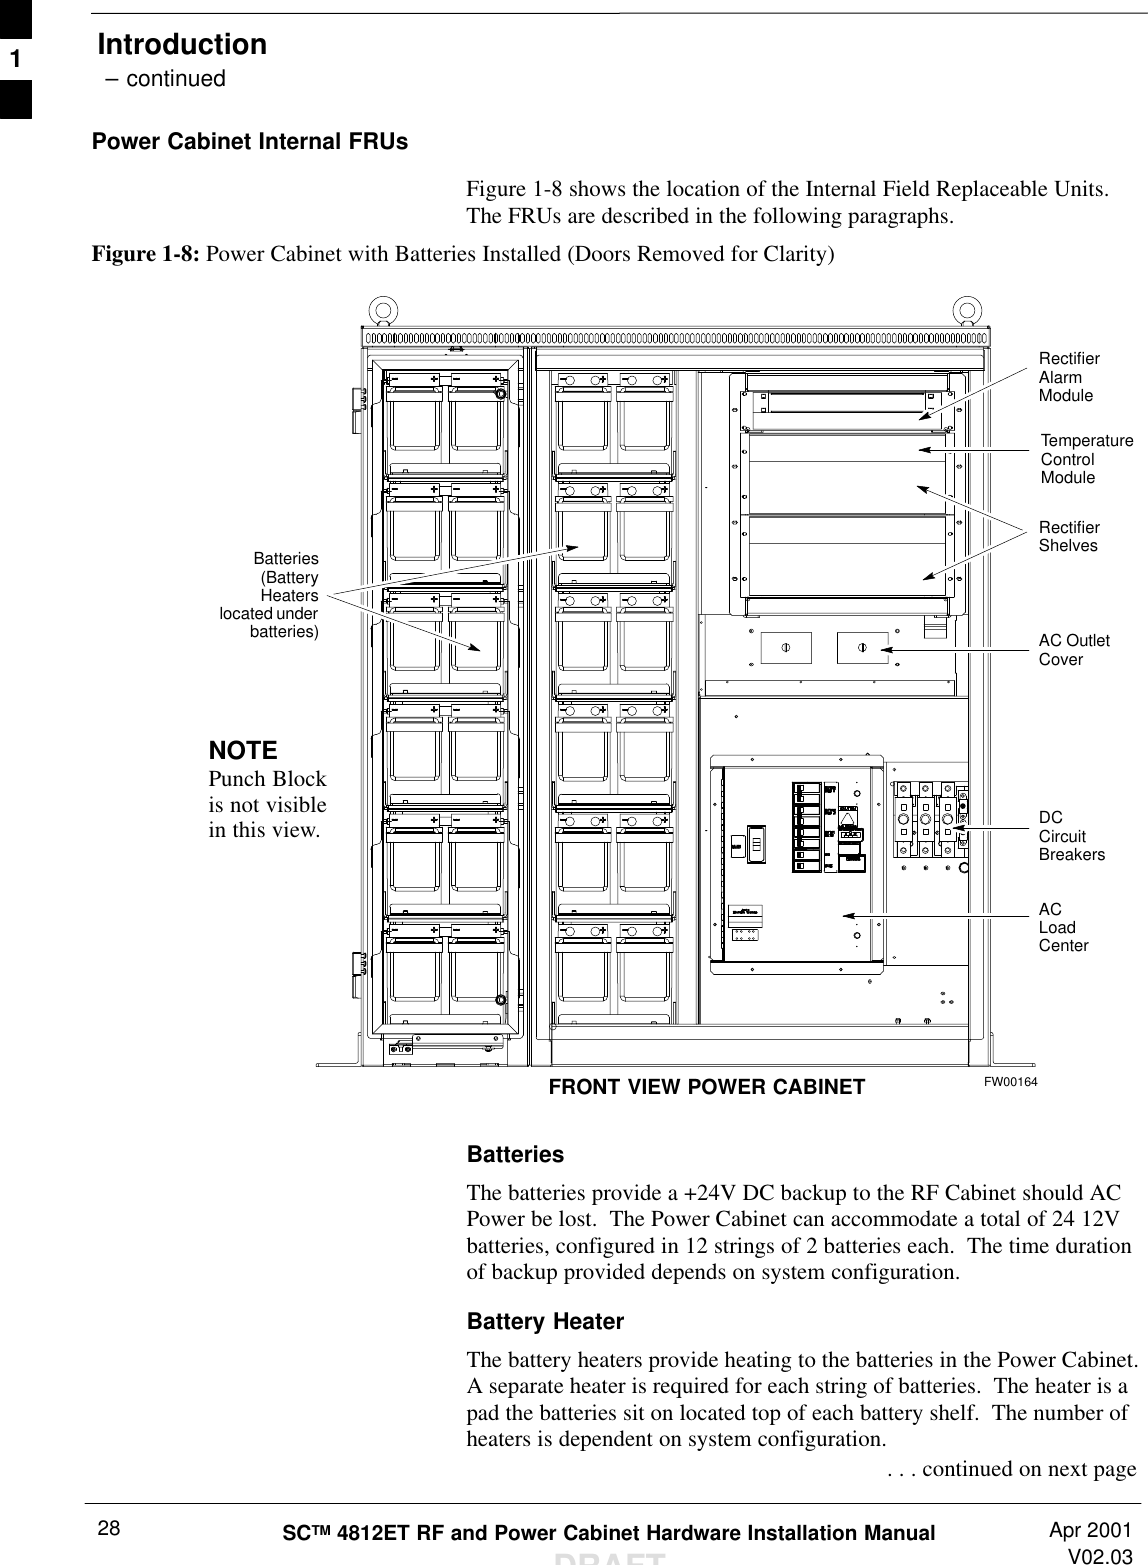 Introduction – continuedSCTM 4812ET RF and Power Cabinet Hardware Installation ManualDRAFTApr 2001V02.0328Power Cabinet Internal FRUsFigure 1-8 shows the location of the Internal Field Replaceable Units.The FRUs are described in the following paragraphs.Figure 1-8: Power Cabinet with Batteries Installed (Doors Removed for Clarity)NOTEPunch Blockis not visiblein this view.RectifierShelvesRectifierAlarmModuleDCCircuitBreakersACLoadCenterAC OutletCoverTemperatureControlModuleFRONT VIEW POWER CABINETBatteries(BatteryHeaterslocated underbatteries)FW00164BatteriesThe batteries provide a +24V DC backup to the RF Cabinet should ACPower be lost.  The Power Cabinet can accommodate a total of 24 12Vbatteries, configured in 12 strings of 2 batteries each.  The time durationof backup provided depends on system configuration.Battery HeaterThe battery heaters provide heating to the batteries in the Power Cabinet.A separate heater is required for each string of batteries.  The heater is apad the batteries sit on located top of each battery shelf.  The number ofheaters is dependent on system configuration. . . . continued on next page1